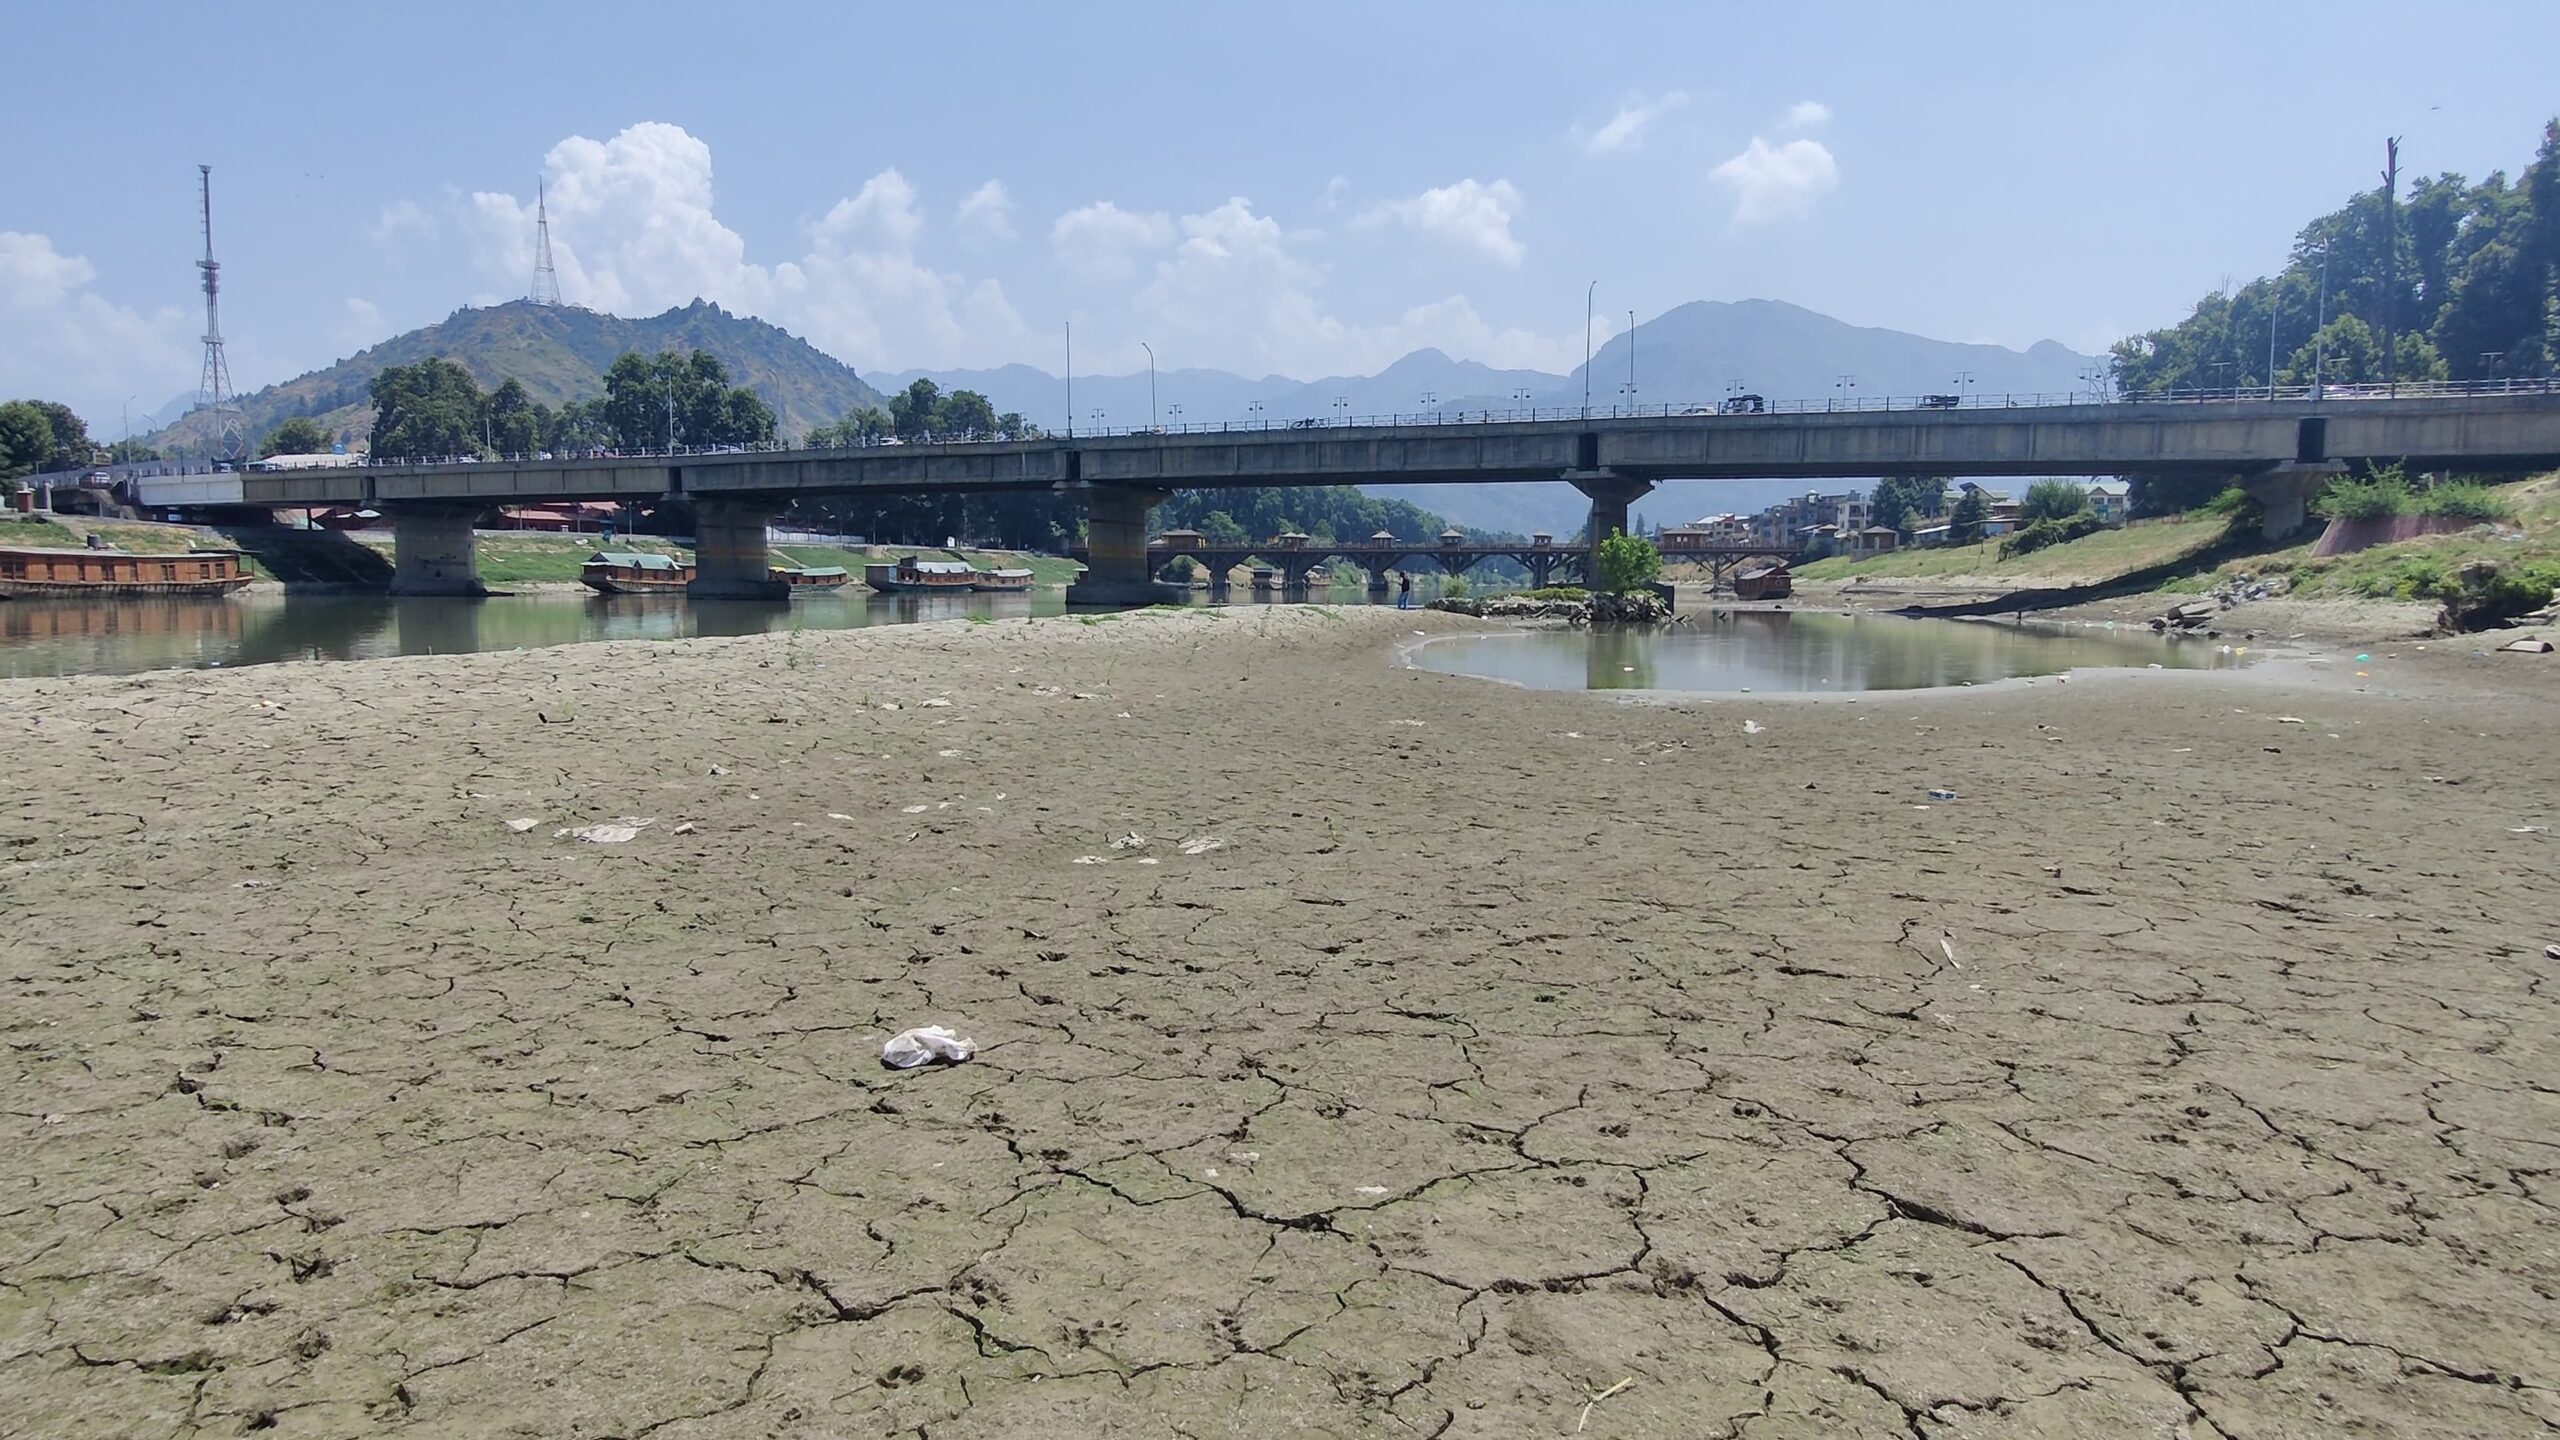 Heatwave Leads to Decline in Water Levels Across Kashmir, Concerns Rise Among Residents and Authorities